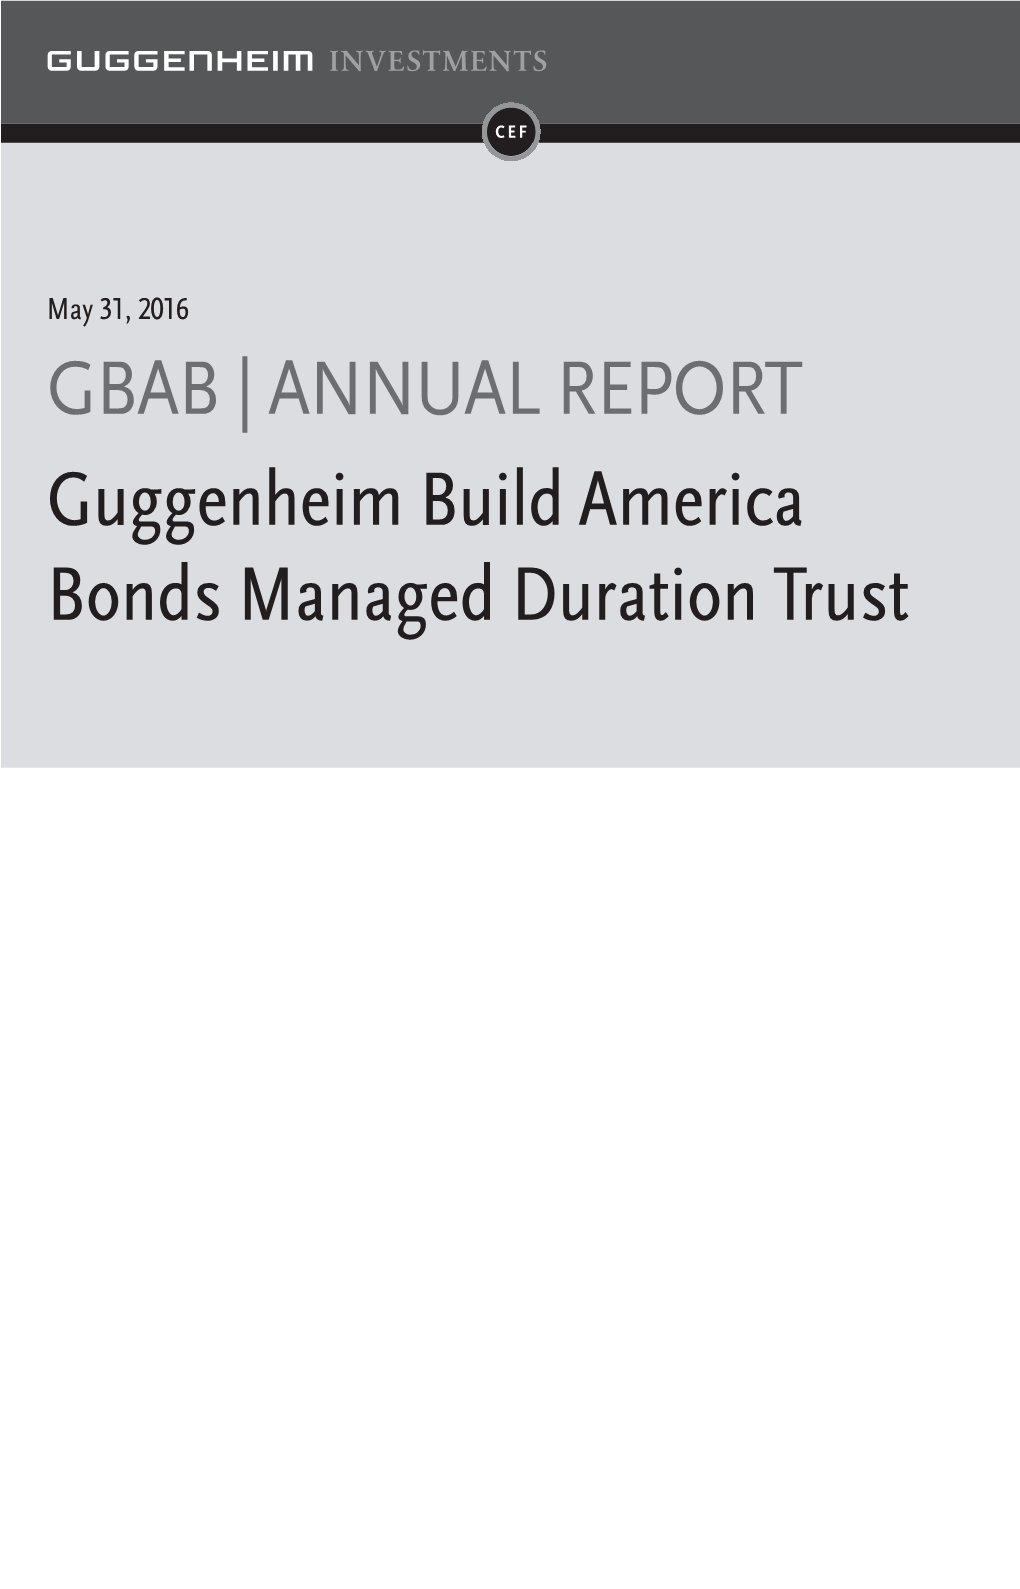 GBAB Annual Report